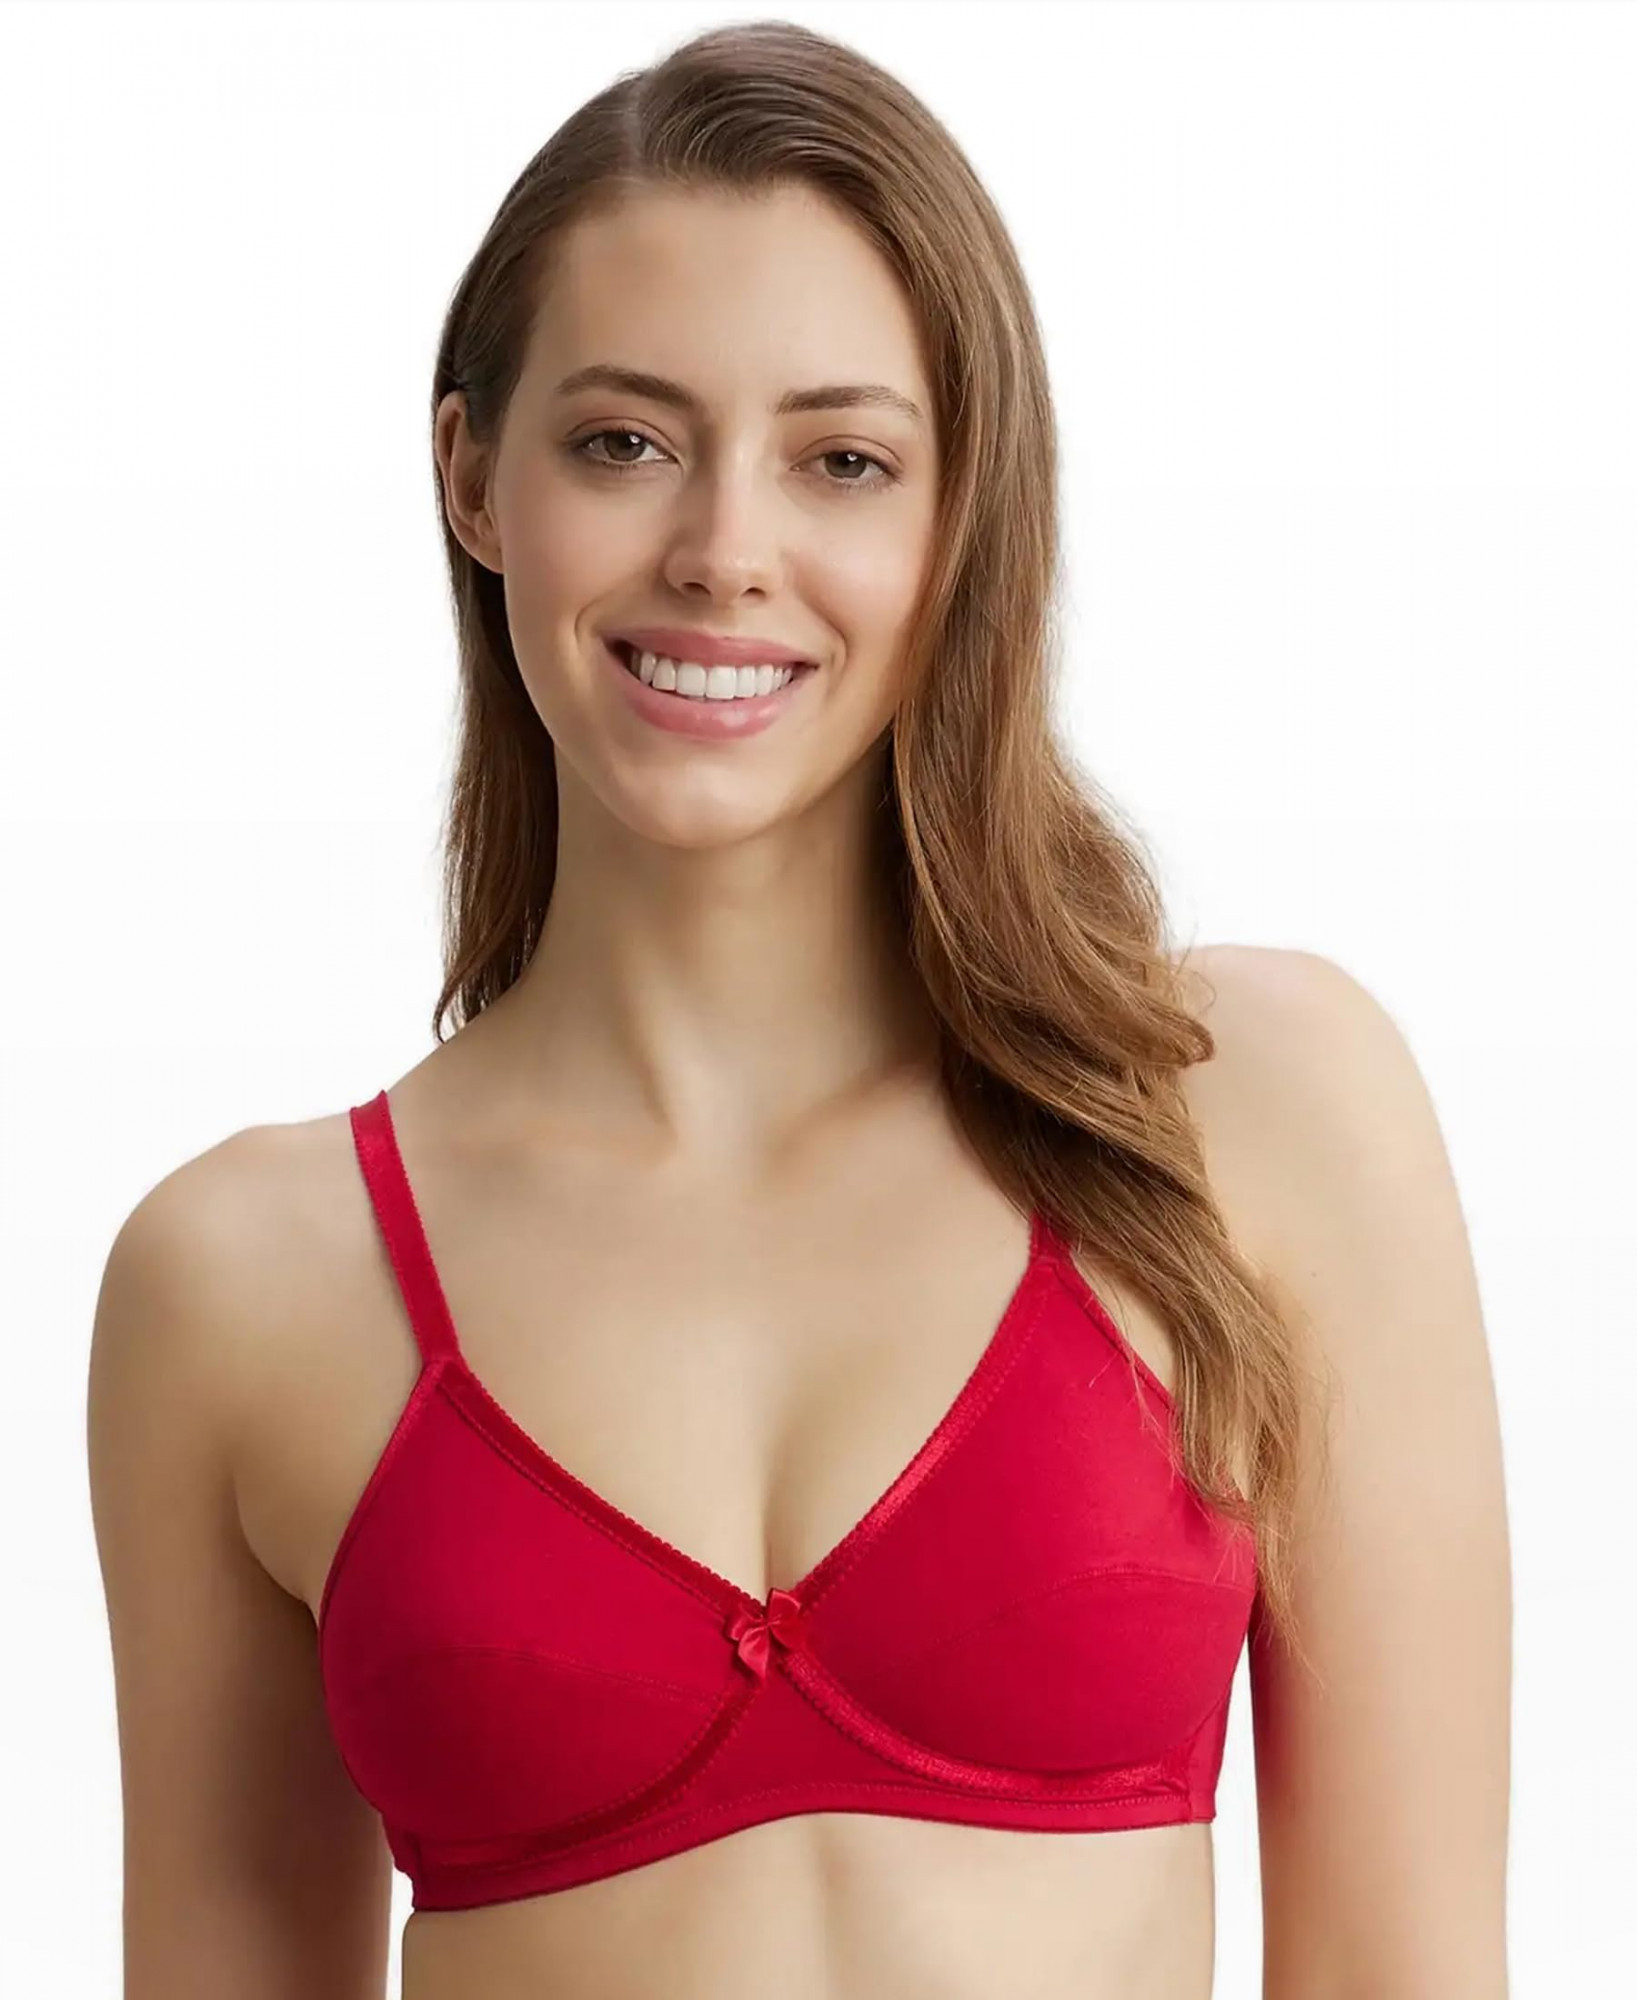 https://www.zebrs.com/uploads/zebrs/products/jockey-1242-womenamp039s-wirefree-non-padded-super-combed-cotton-elastane-stretch-medium-coverage-cross-over-everyday-bra-with-adjustable-strapsred-love40bsize-32b-96888055457542_l.jpg